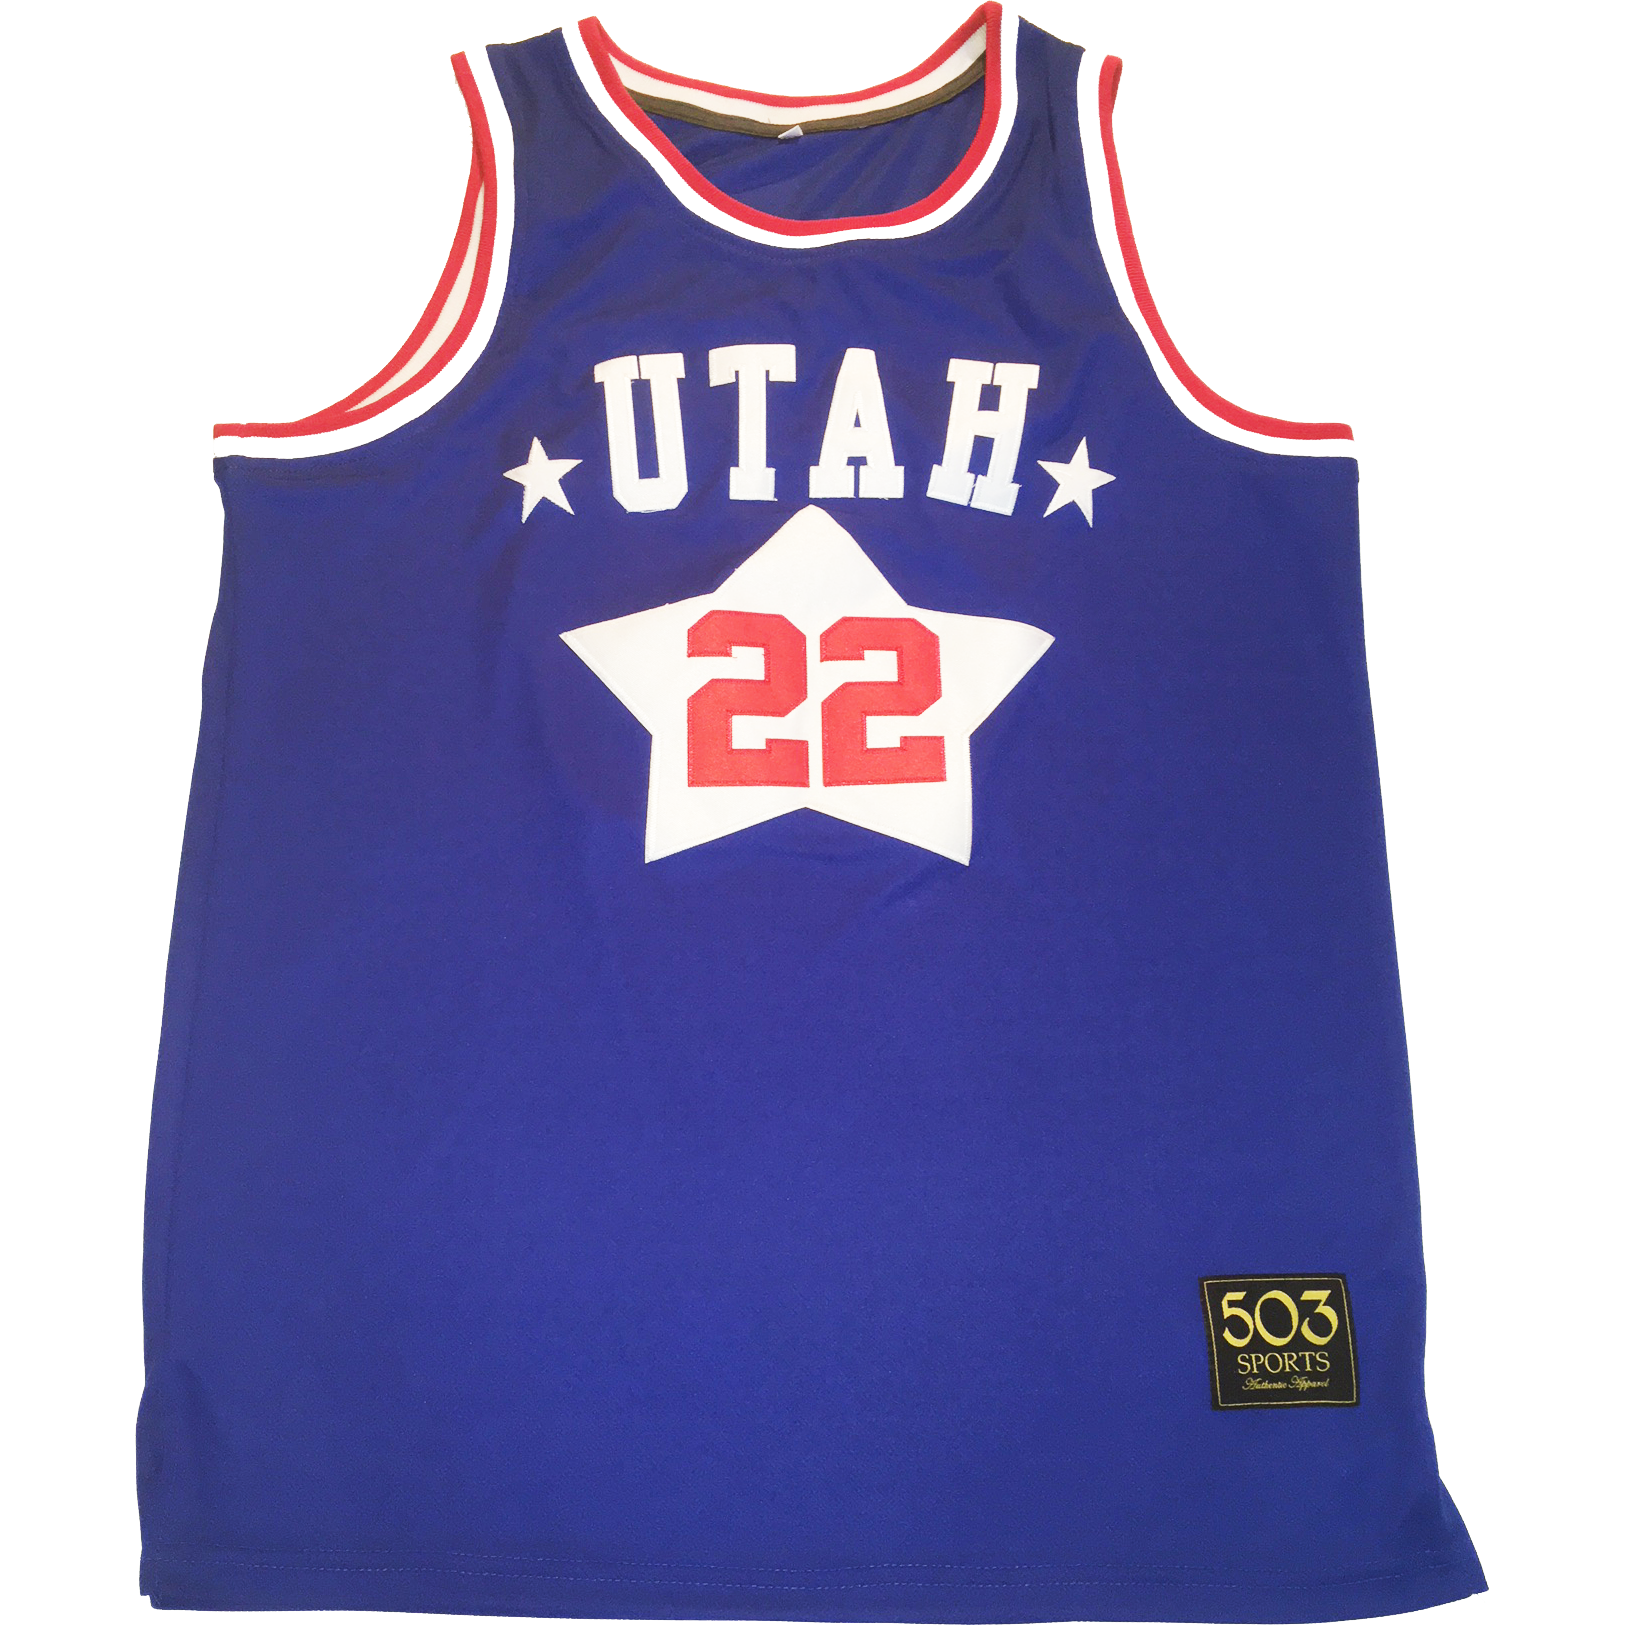 SLC STARS to wear throwback uniforms inspired by the 70s